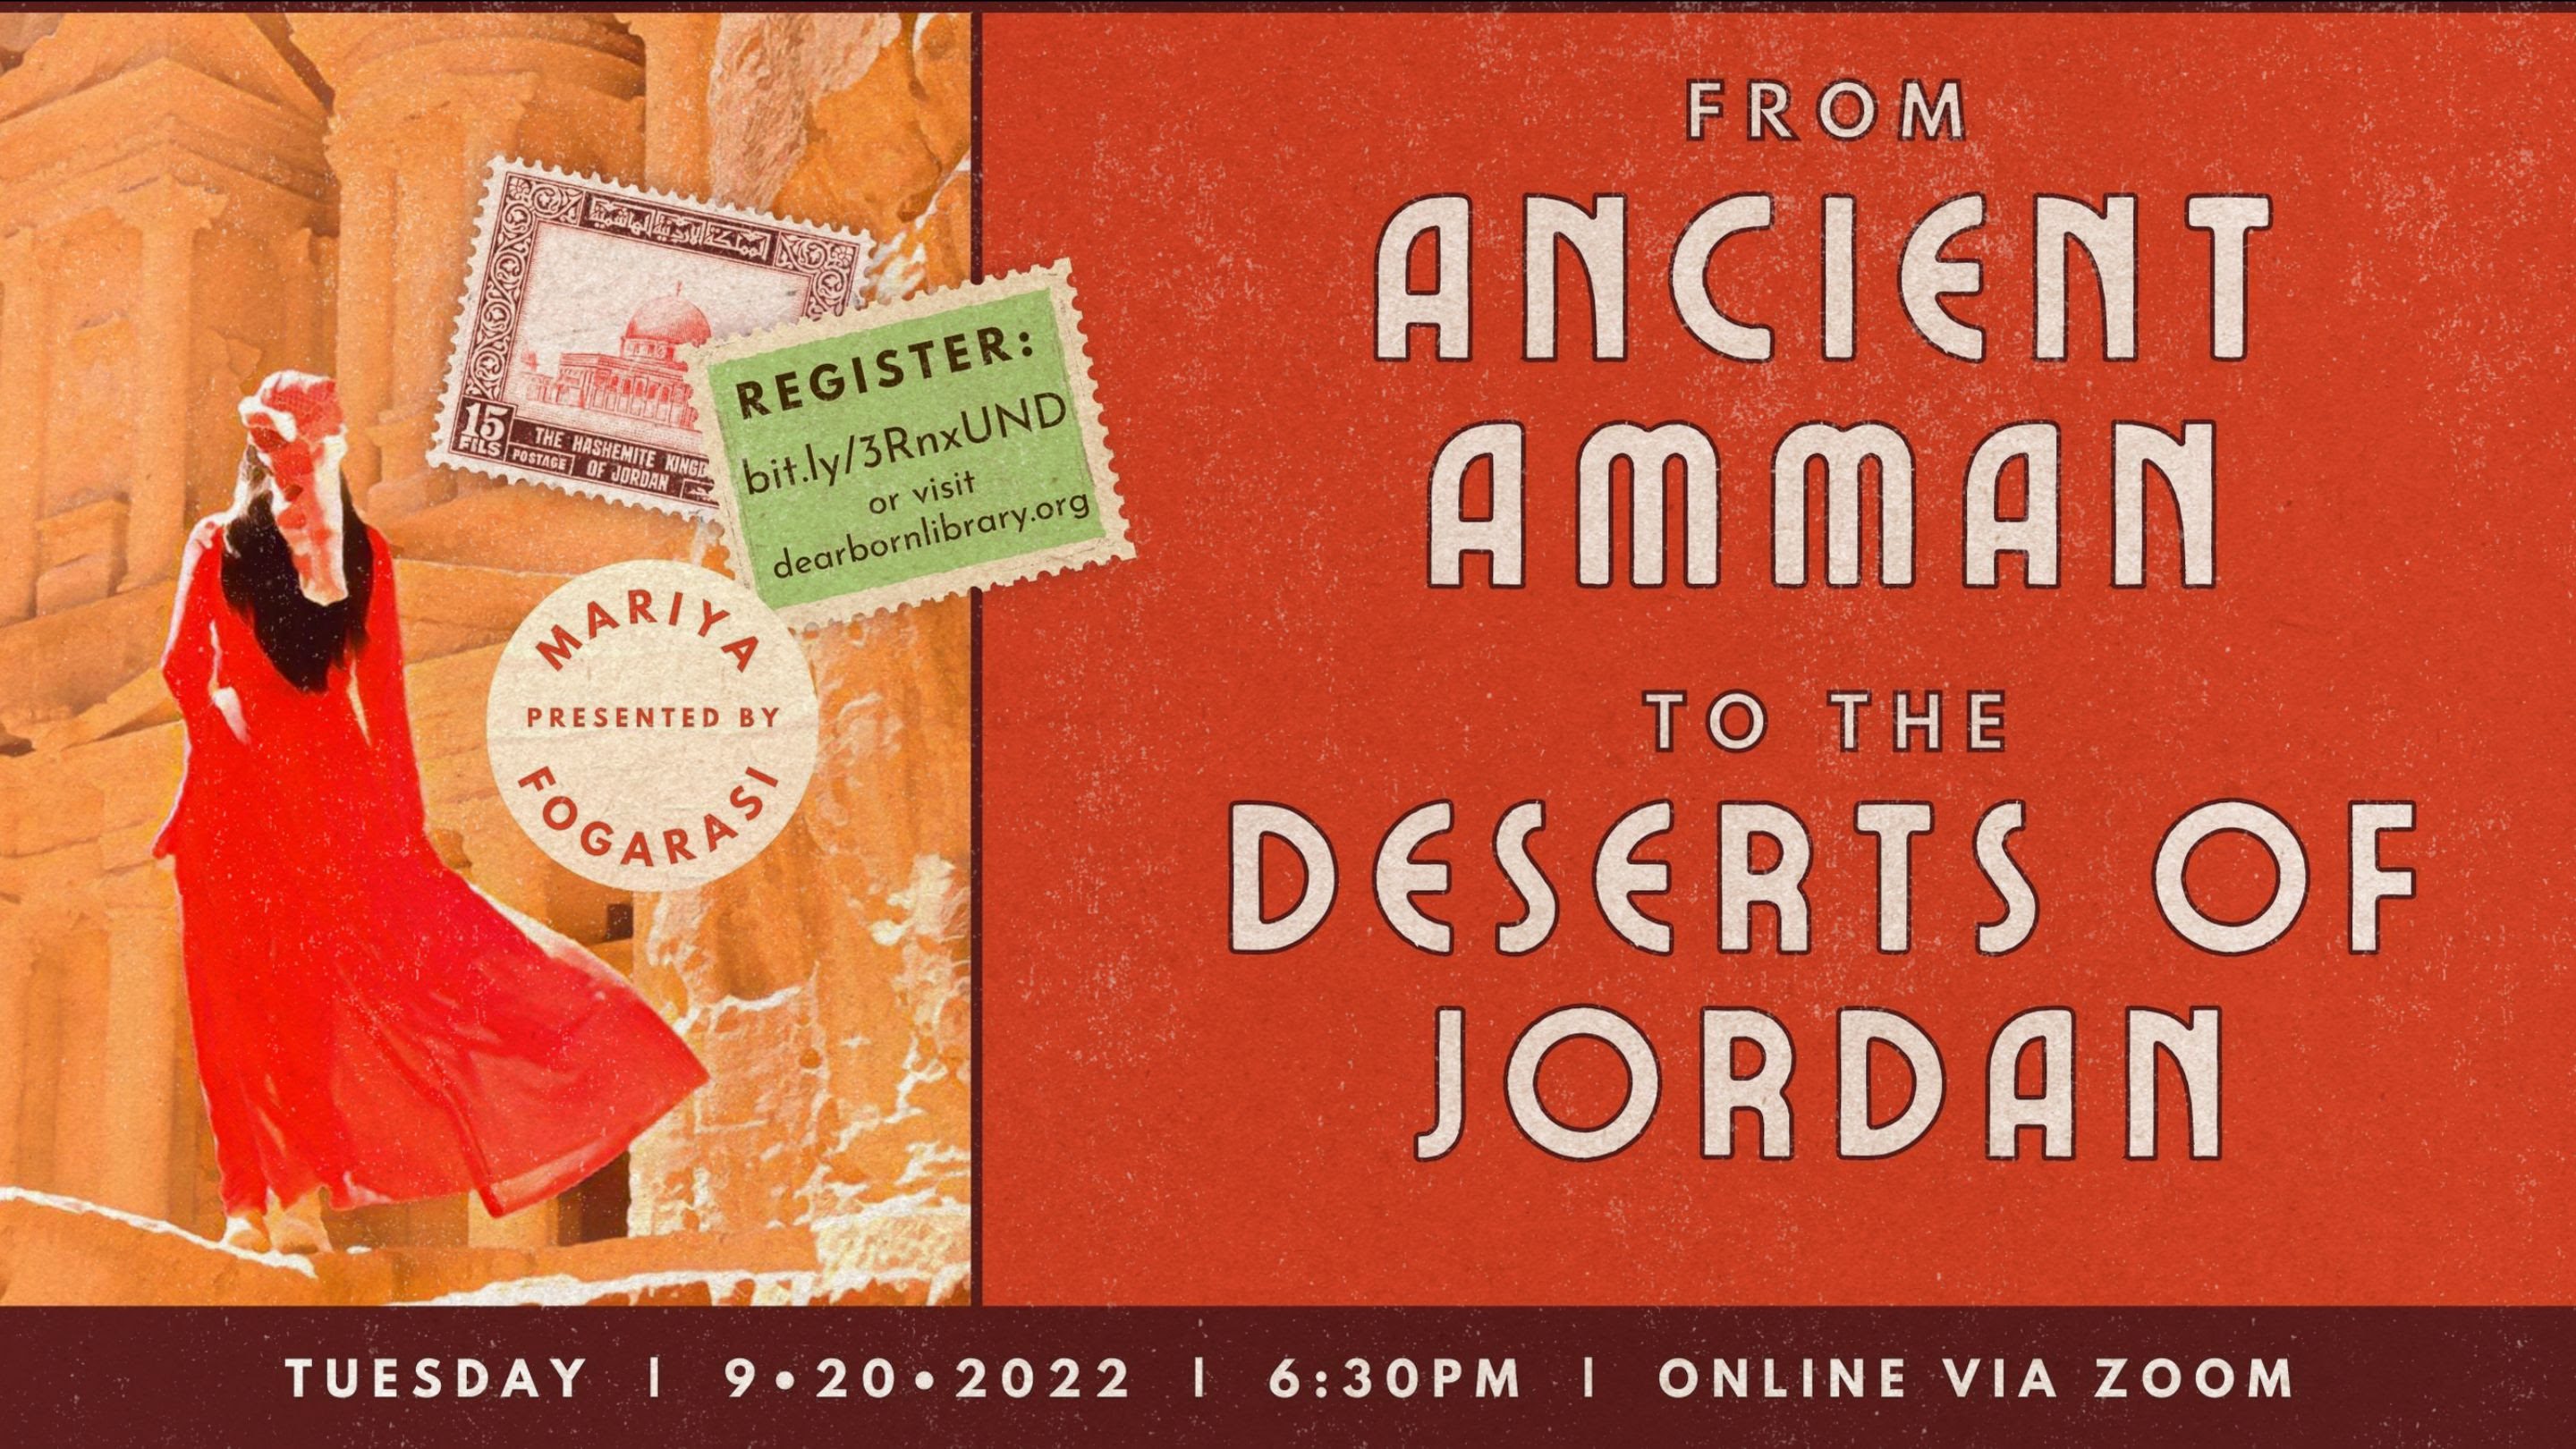 Flyer for "Travel Virtually from Ancient Amman to the Deserts of Jordan with Mariya Fogarasi's Zoom Program" event at Dearborn Public Library, Tuesday, Sept. 20 at 6:30 p.m.